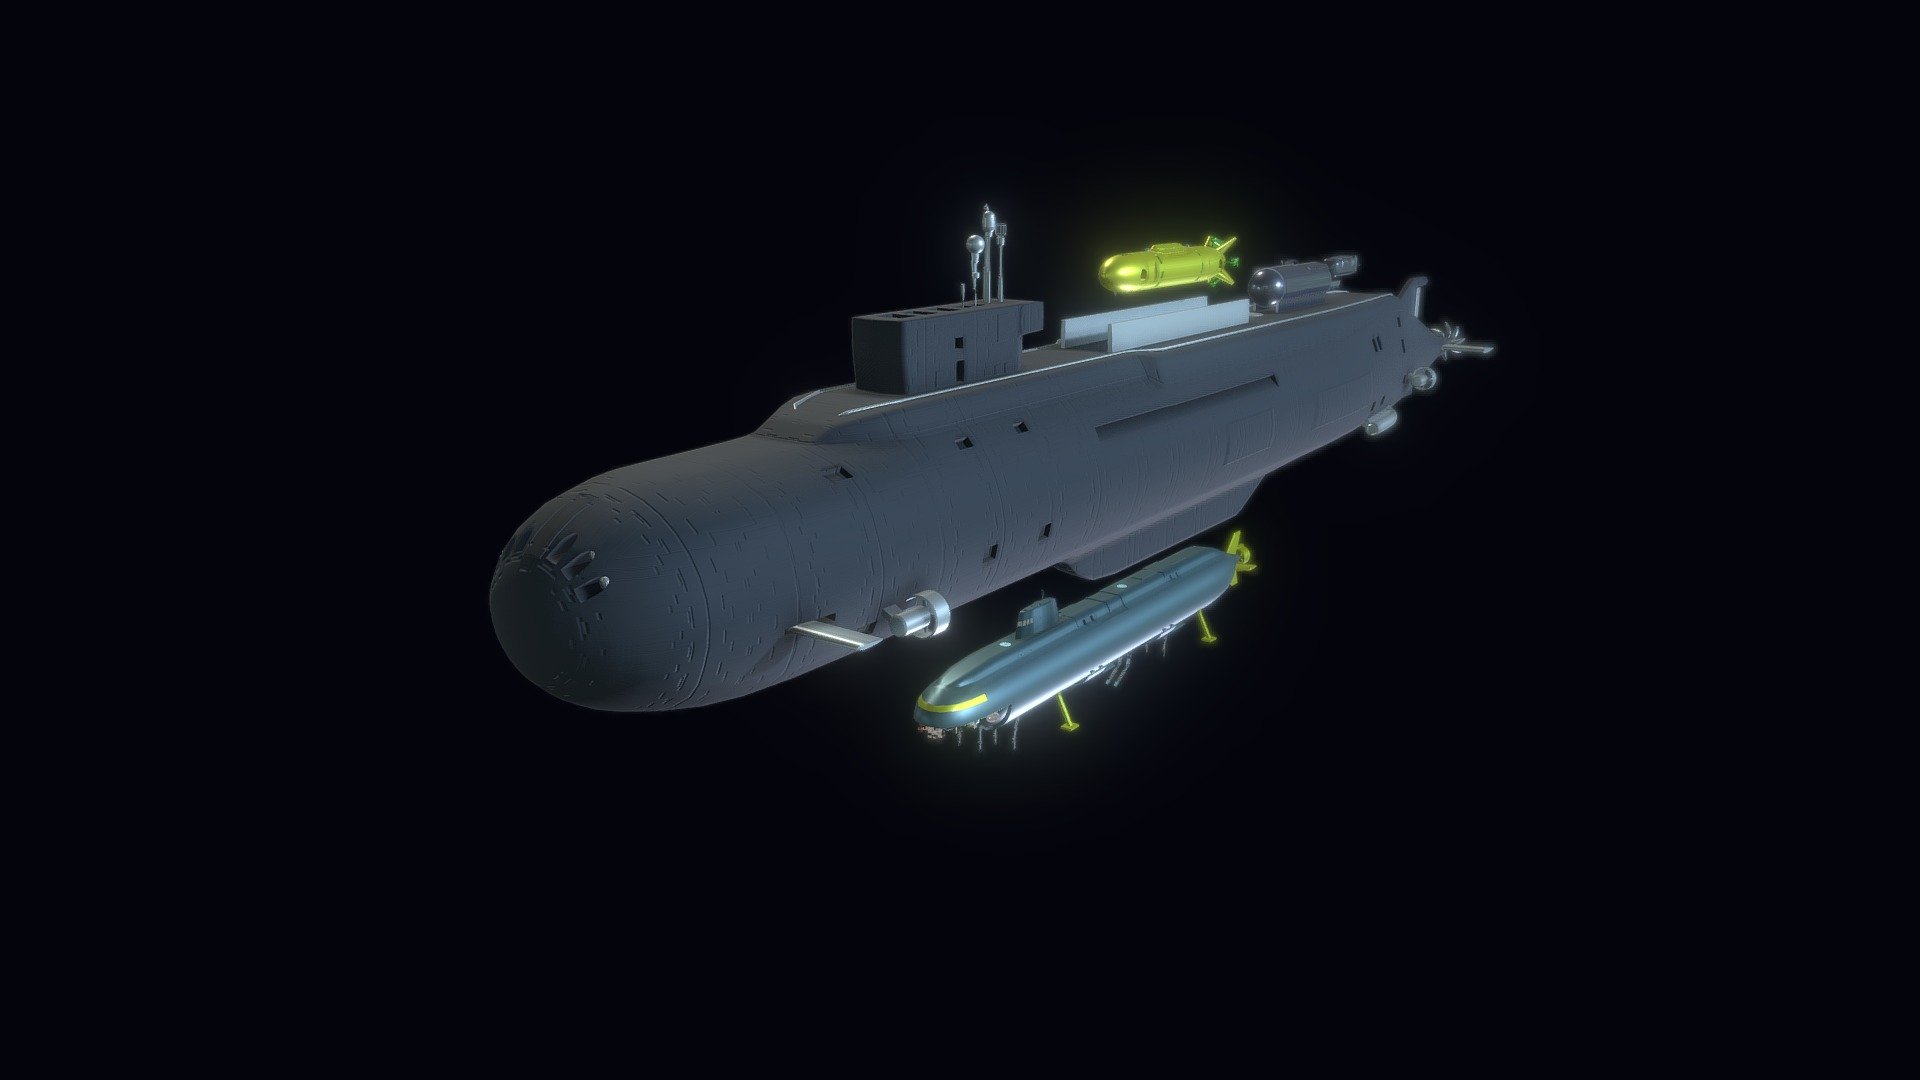 The K-329 Belgorod is a Russian nuclear-powered submarine with atomic weapons. It carries Poseidon drones, a weapon described as &ldquo;apocalypse torpedo